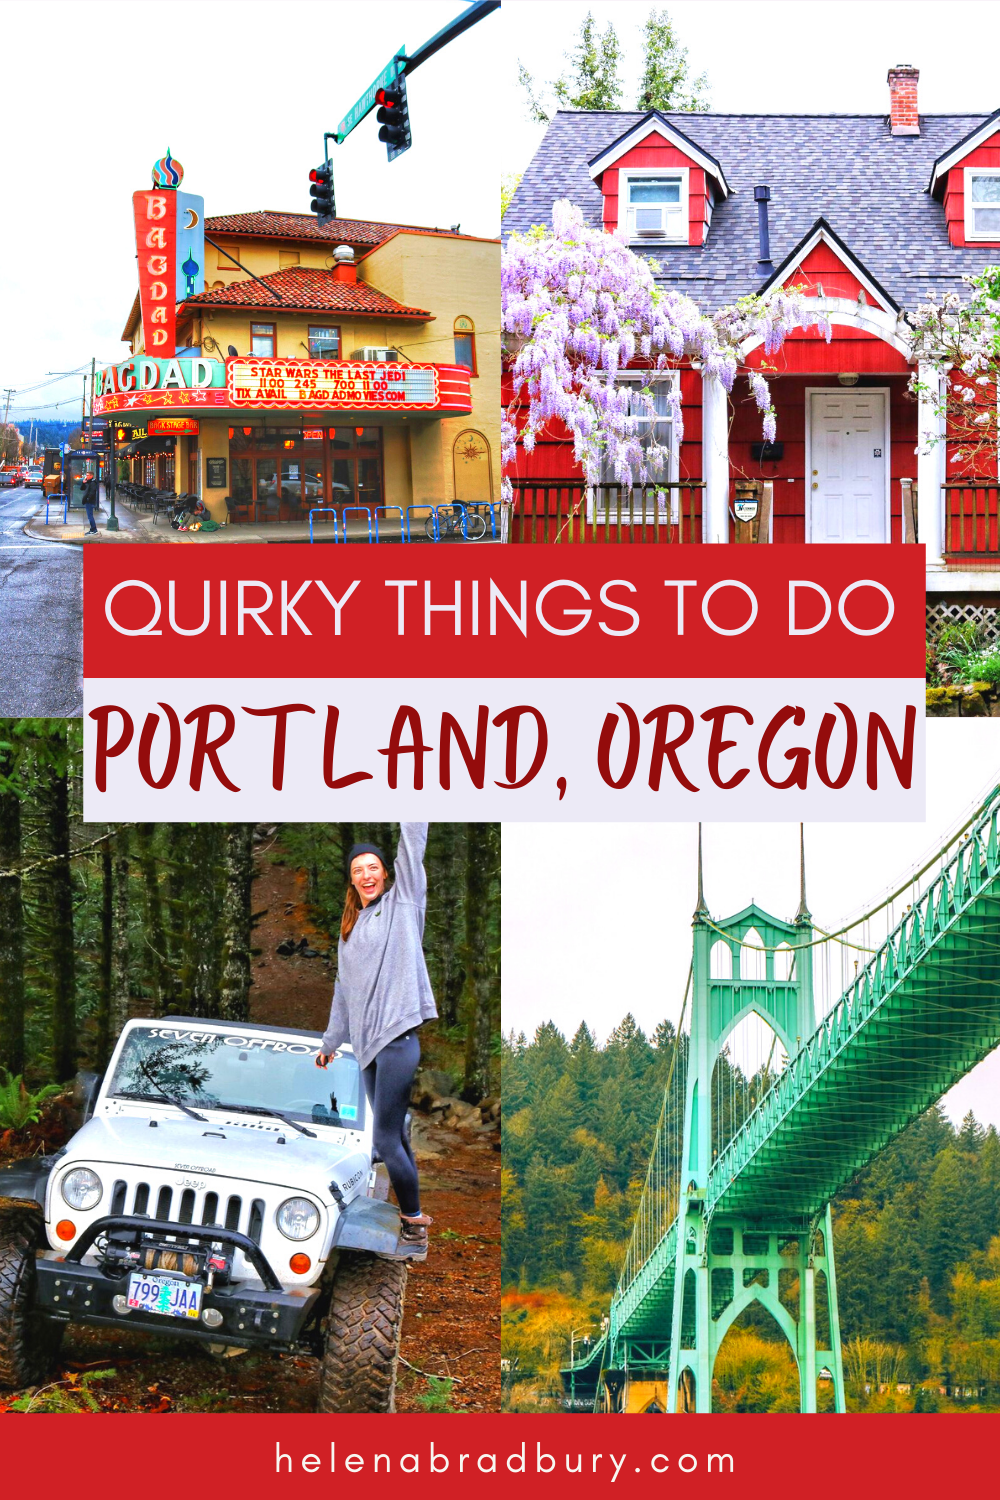 Here’s a Portland bucket list guide for unique things to do in Portland Oregon according to a local | portland oregon things to do in downtown | portland oregon unique | best things to do in portland oregon | portland oregon best kept secrets | fun …